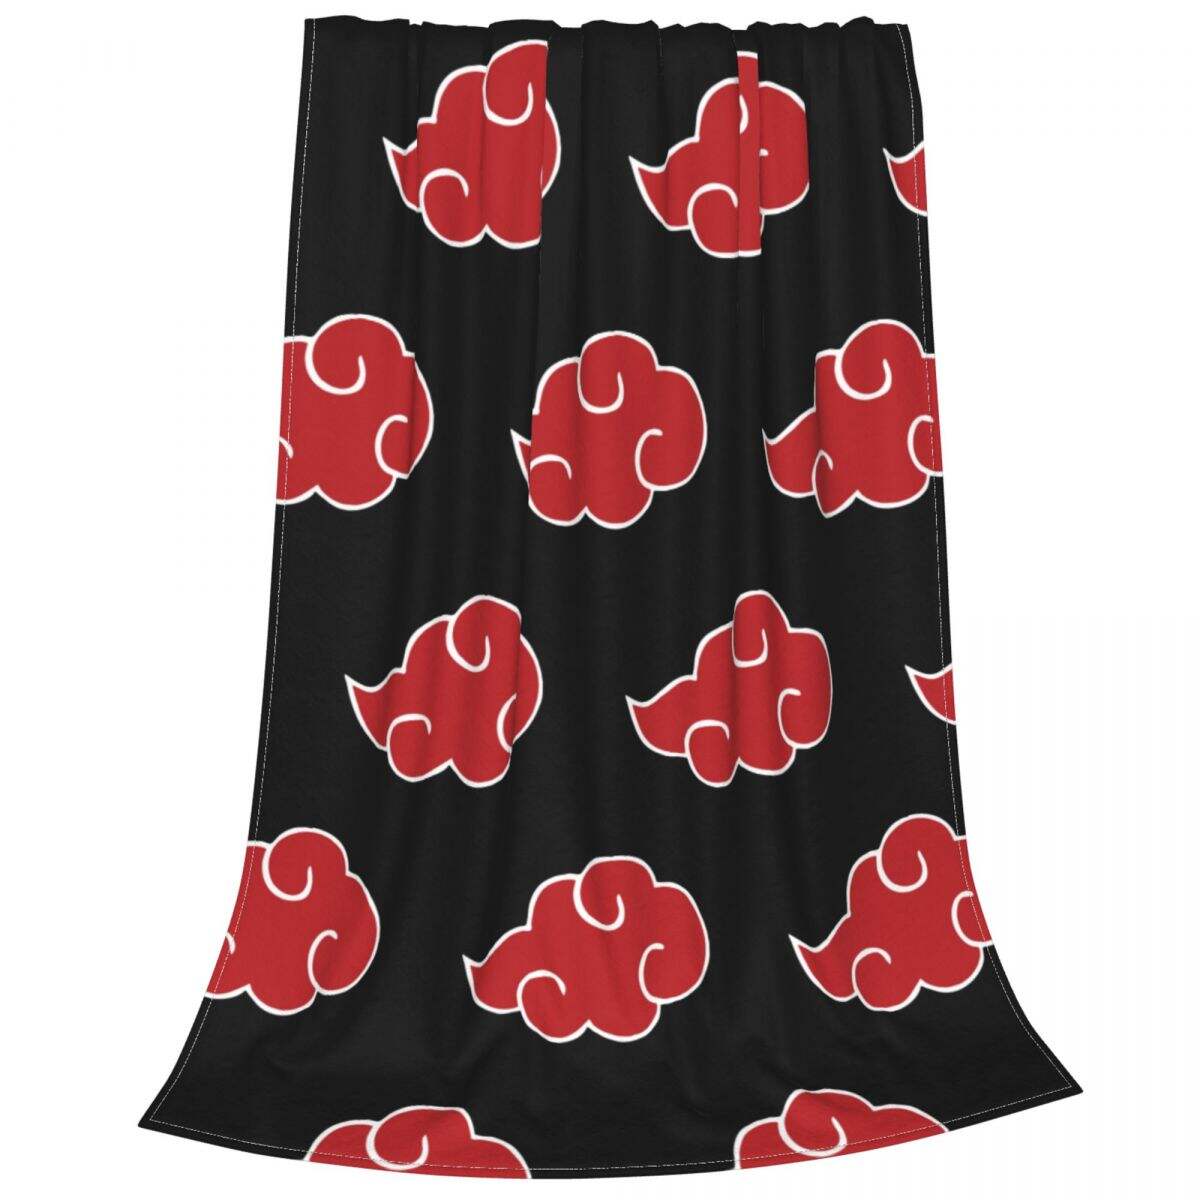 Japan Anime Akatsuki Clouds Blankets Flannel Winter Konoha Neji Breathable Soft Throw Blanket for Sofa Office Quilt Bedspreads 4